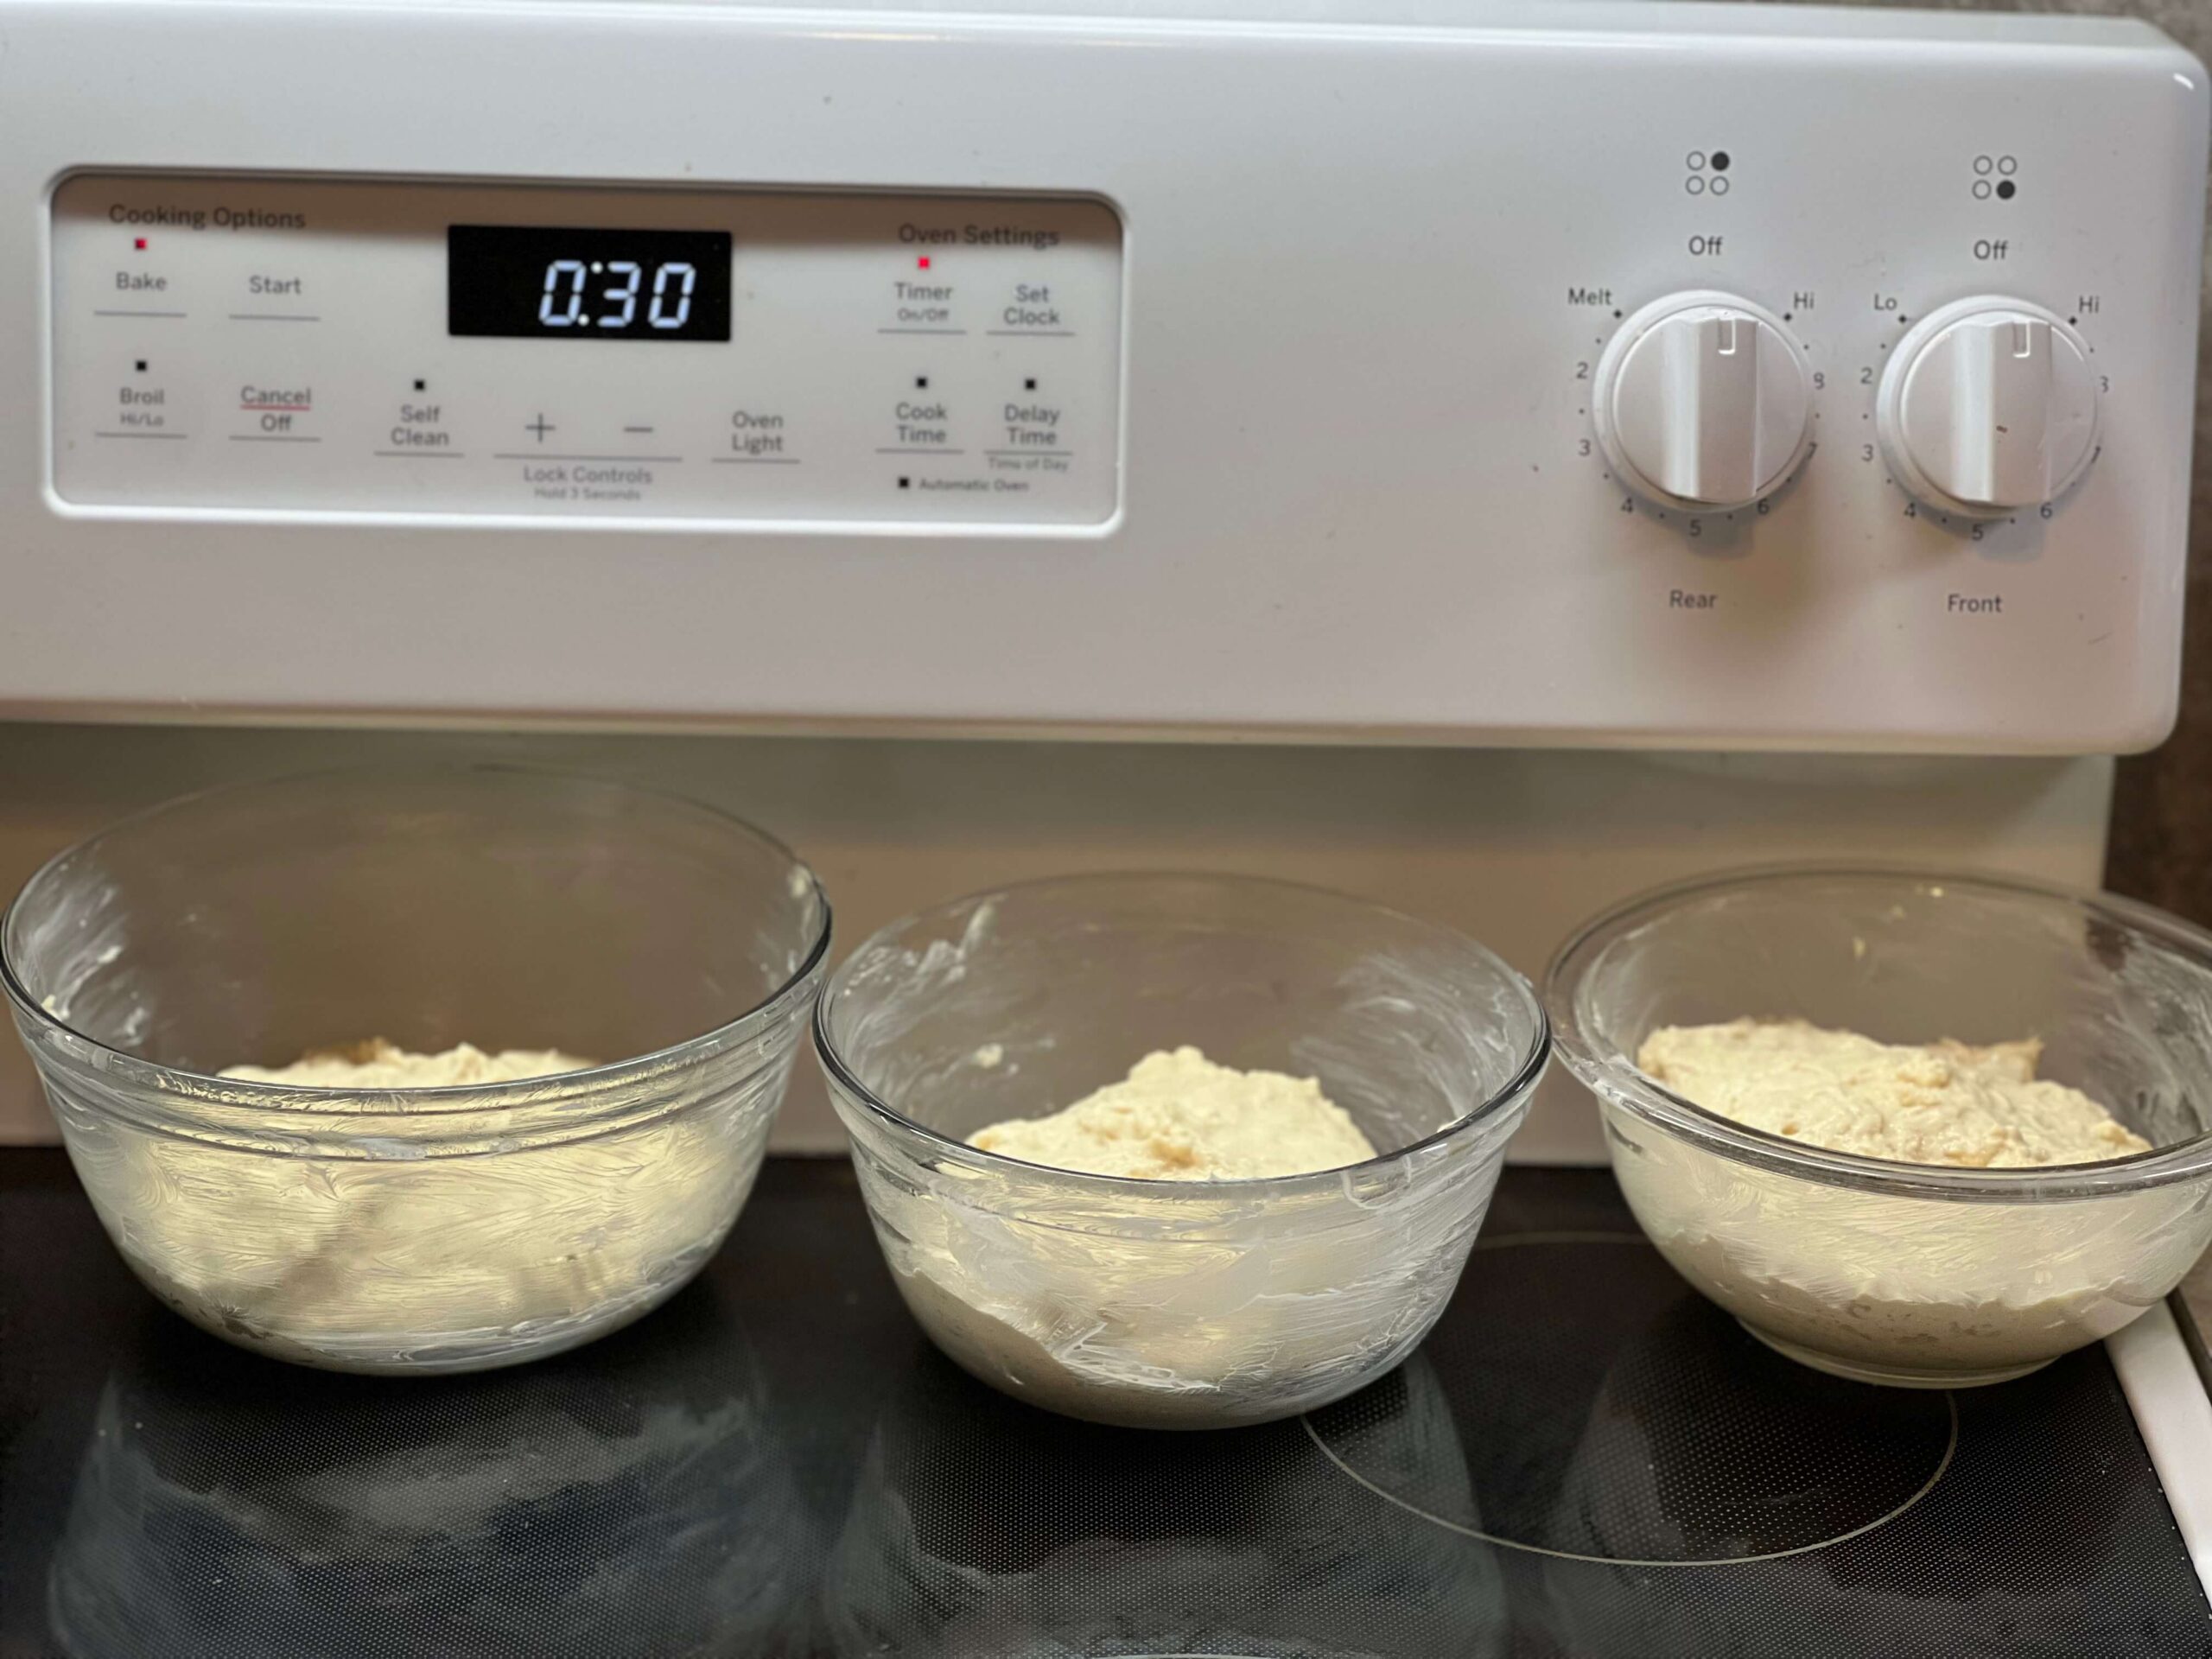 The peasant bread dough is ready to rise for the last time before baking.